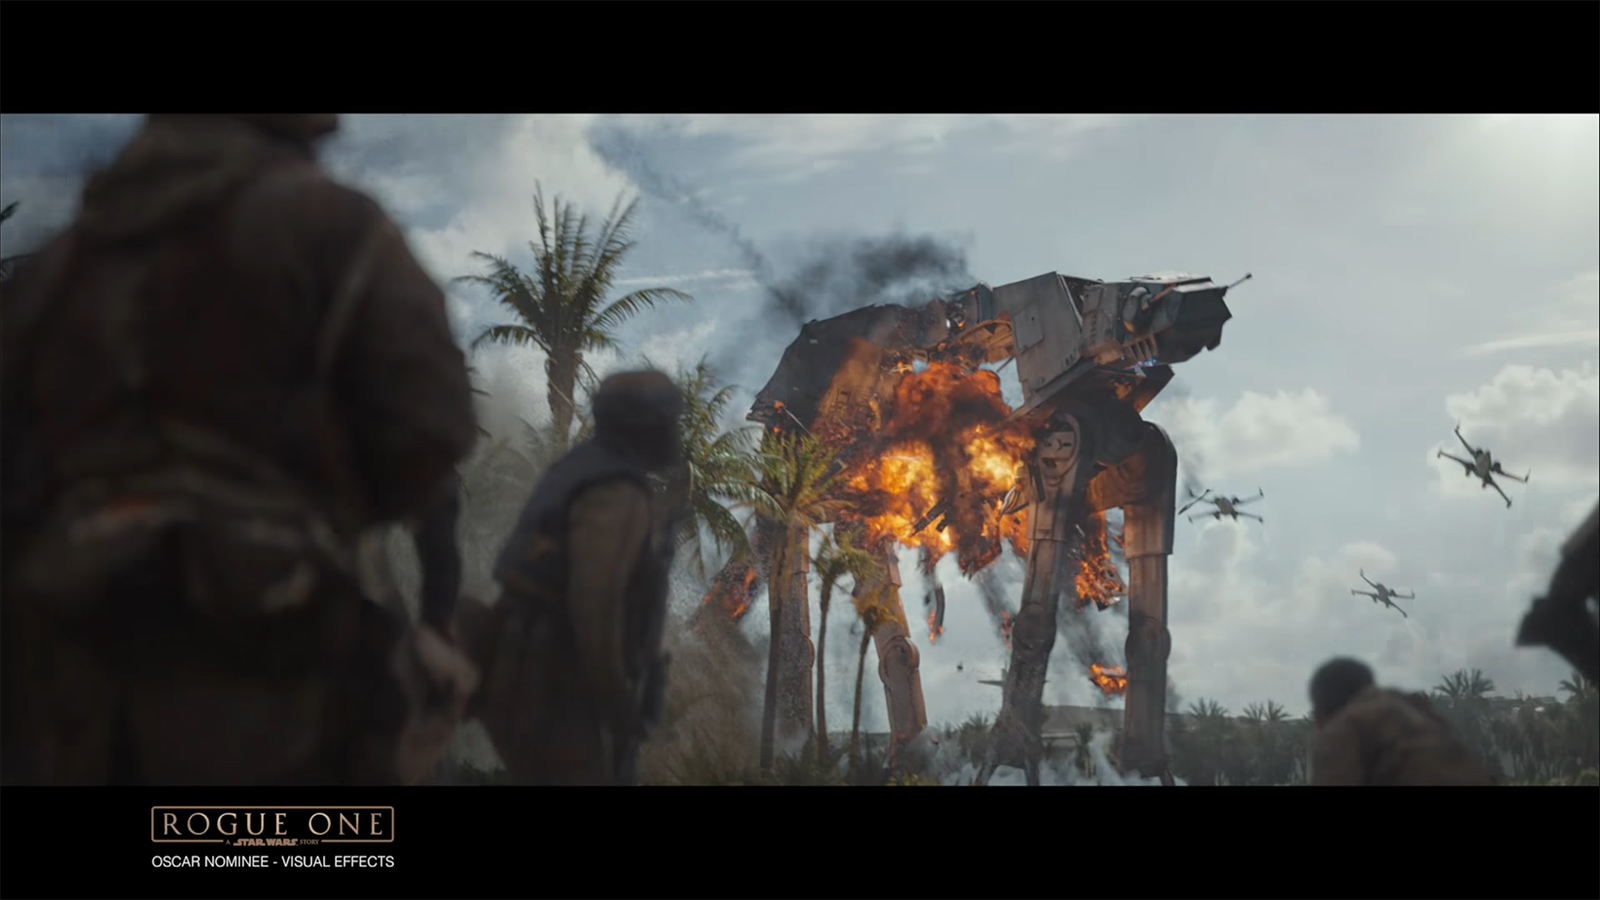 Behind the magic creating jedha and scarif for rogue one a star wars story